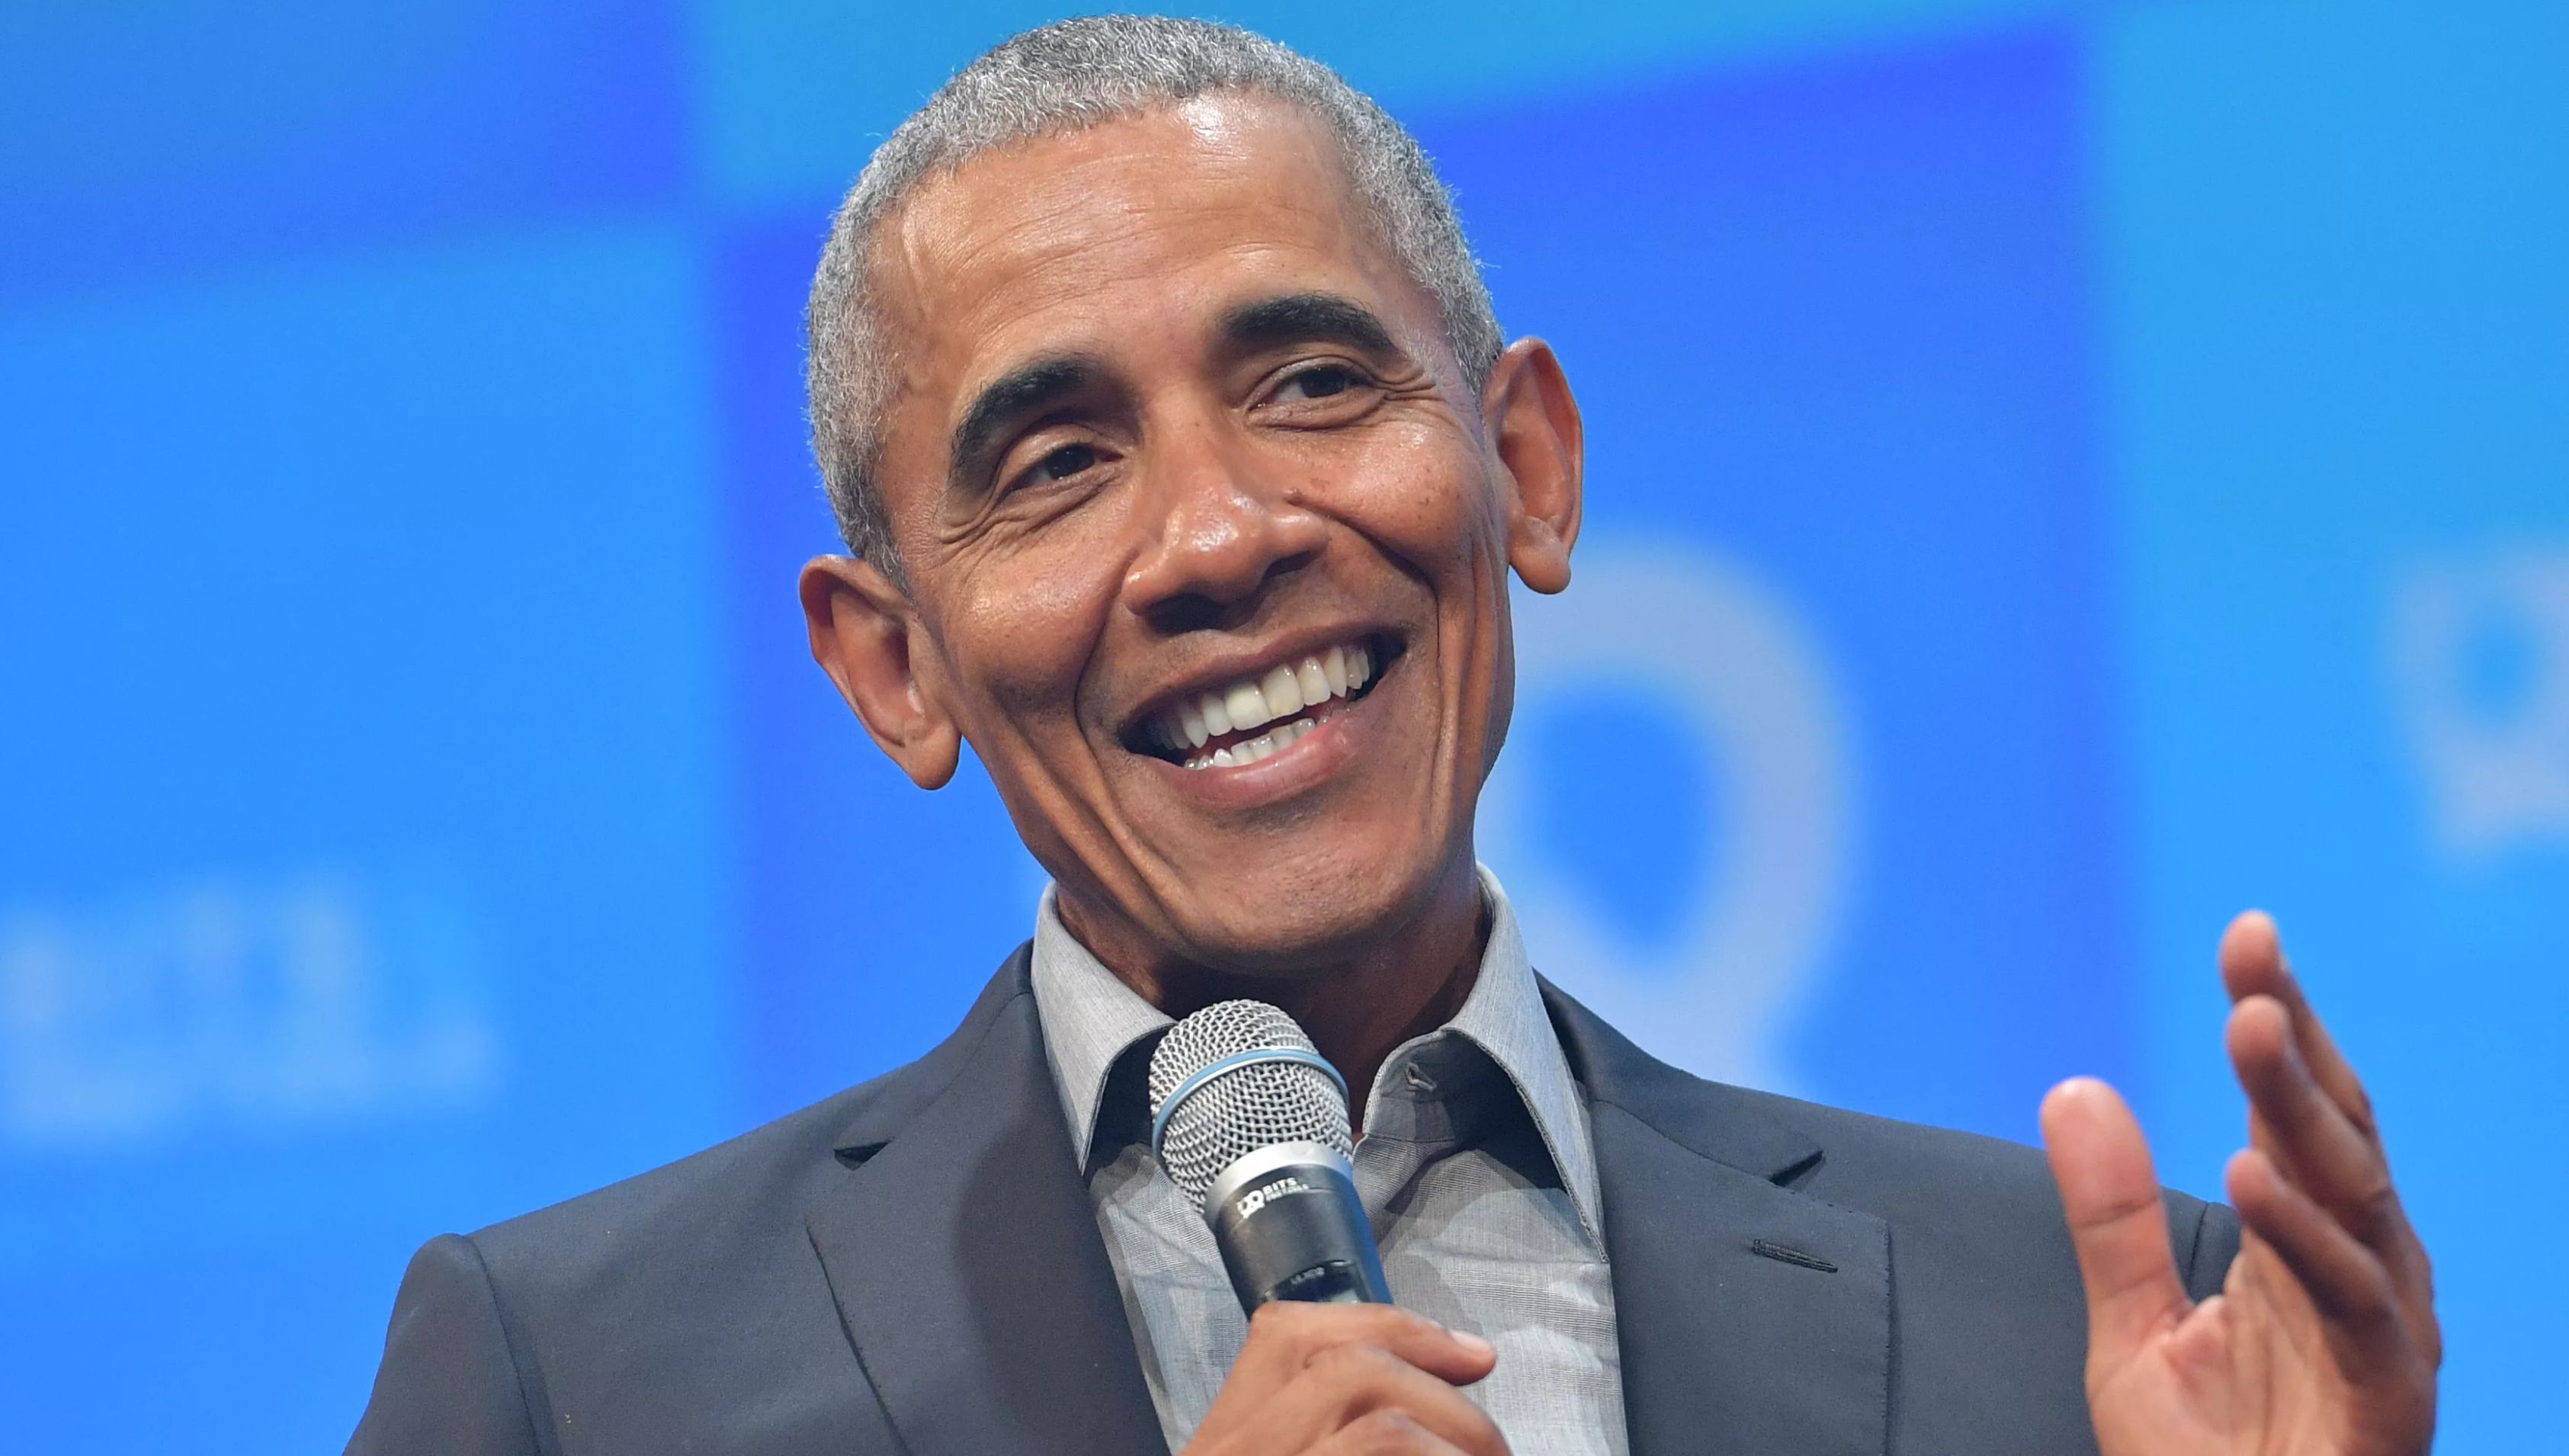 Black Porno Barack Obama - Twitter Goes Wild After It's Discovered Barack Obama Follows This Porn Star